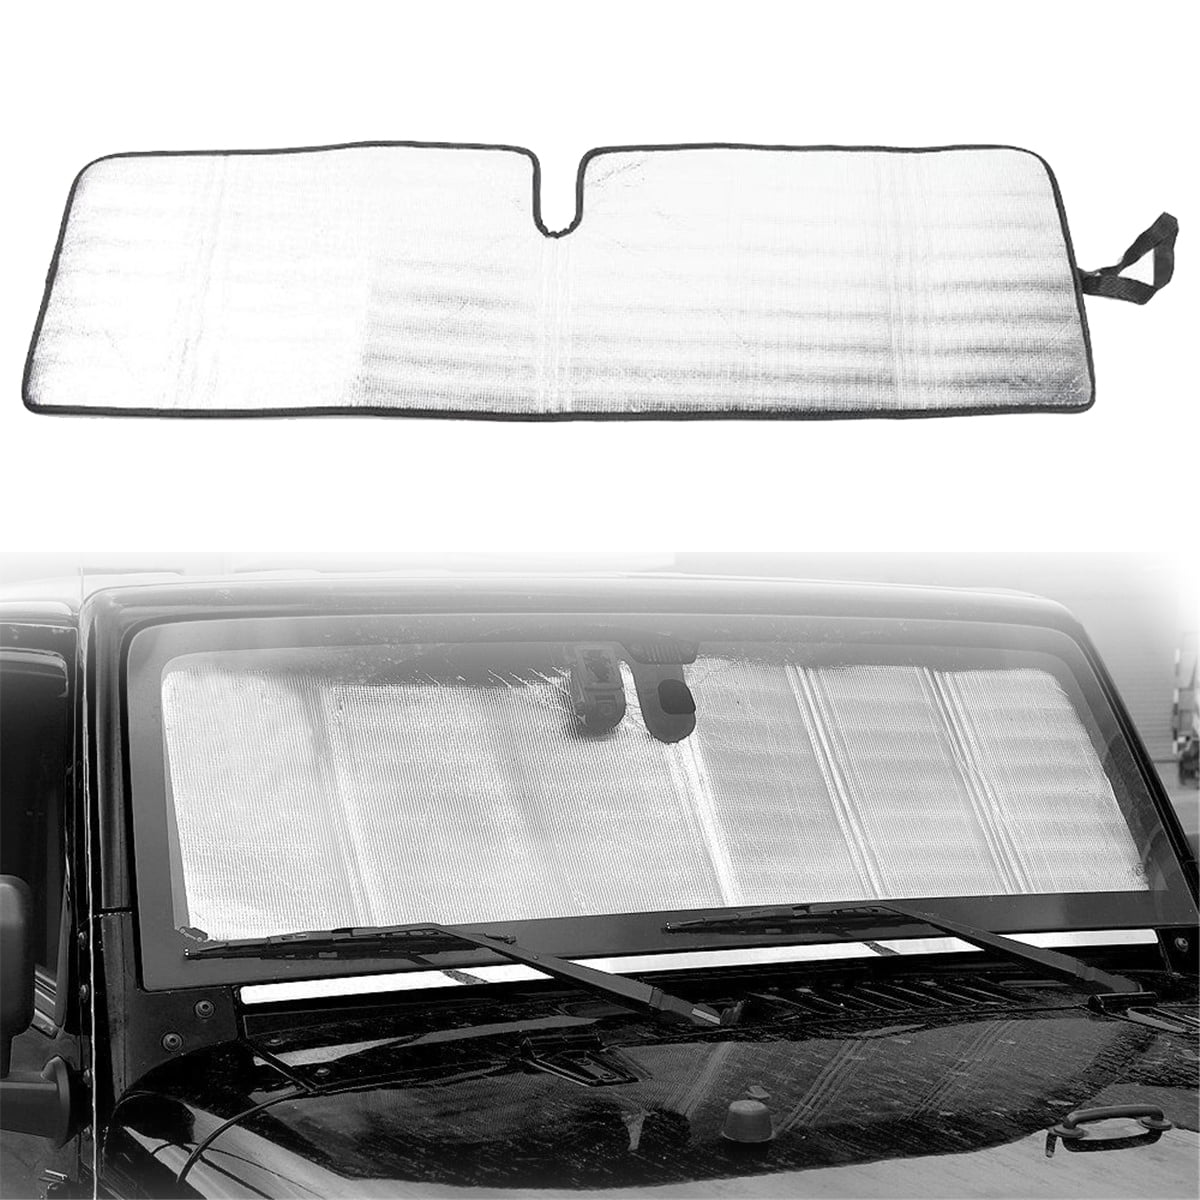 Blocks UV Rays Sun Visor Protector Sunshade to Keep Your Vehicle Cool and Damage Free Windshield Sun Shade Easy to Use Car Accessories Fit Most Windshields